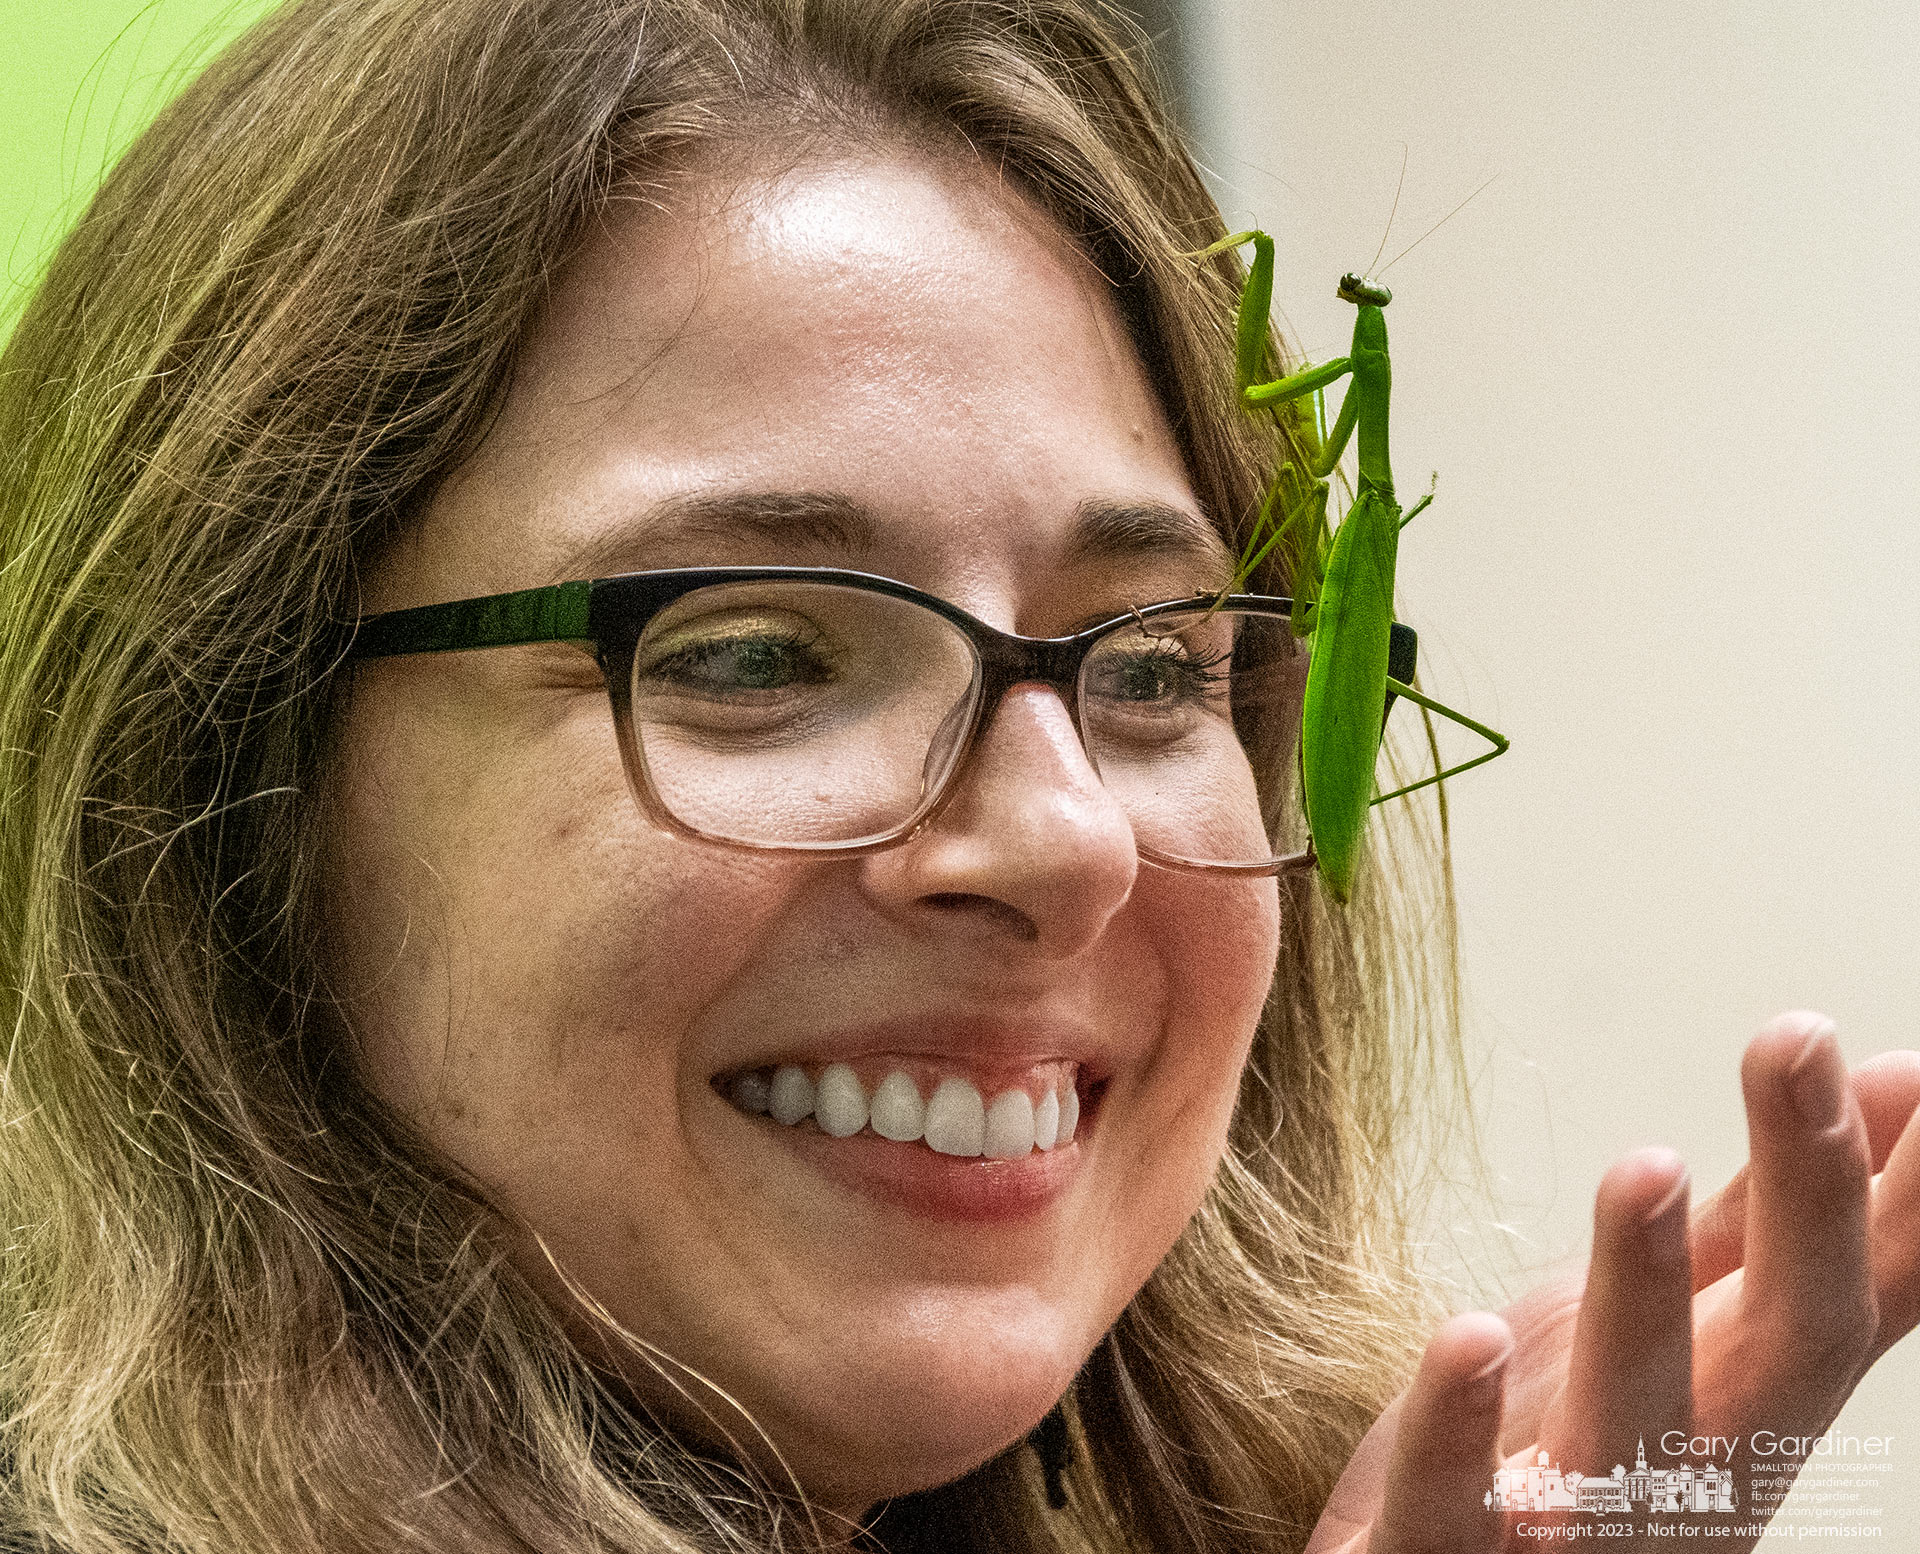 A praying mantis intended to mesmerize children attending BUG OUT insect, arachnid, and centipede show at the Westerville Library climbs the face of a librarian who chose to help manage the insect during a break in the show. My Final Photo for October 14, 2023.